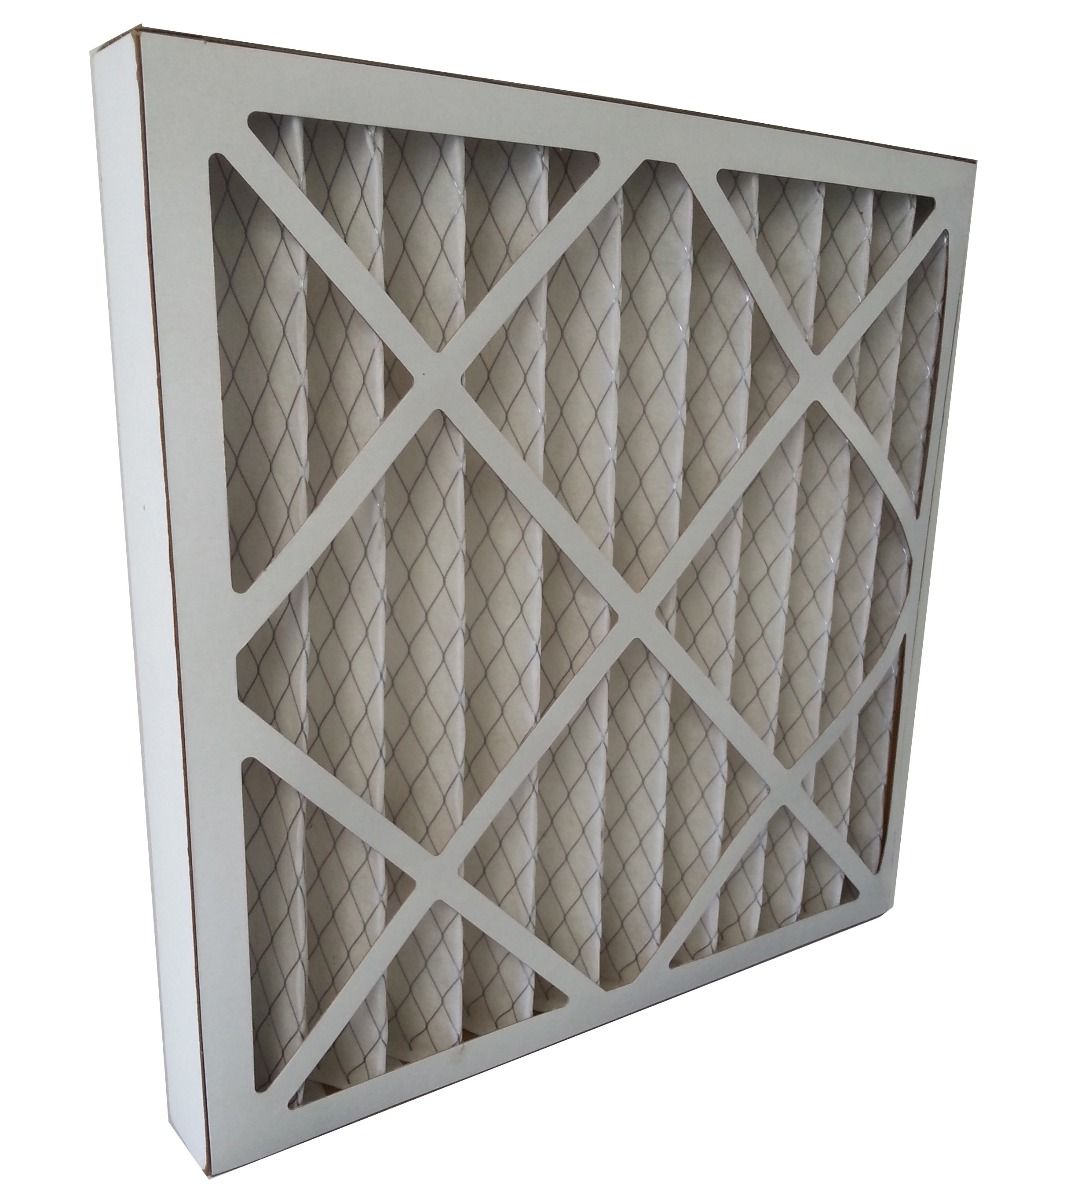 Fresh air pleated filters Grade G4